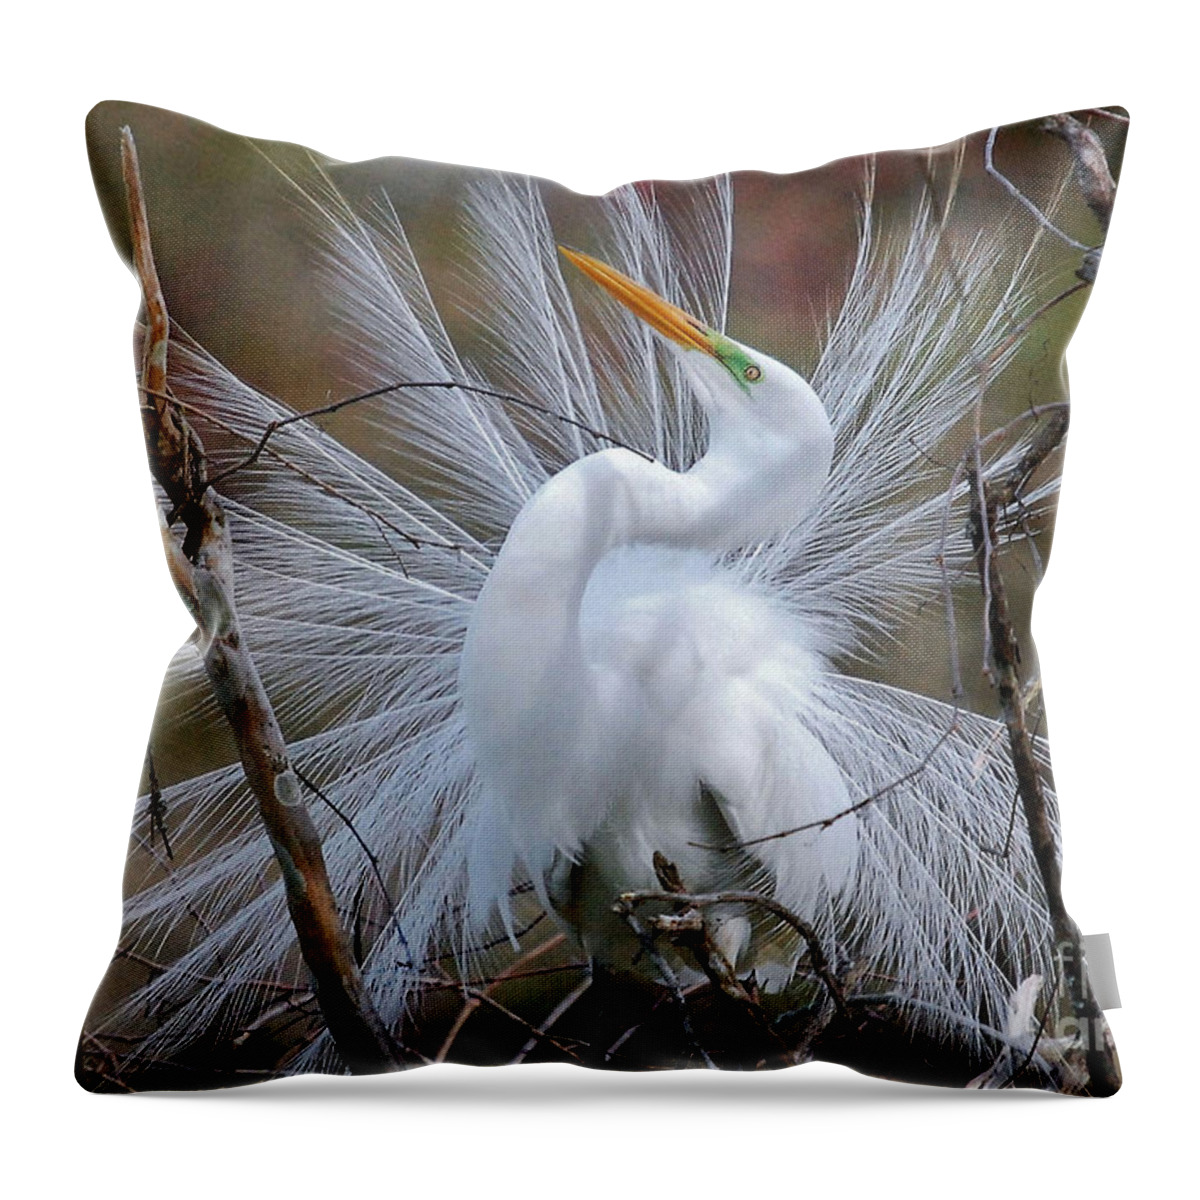 Birds Throw Pillow featuring the photograph Great White Egret With Breeding Plumage by Kathy Baccari